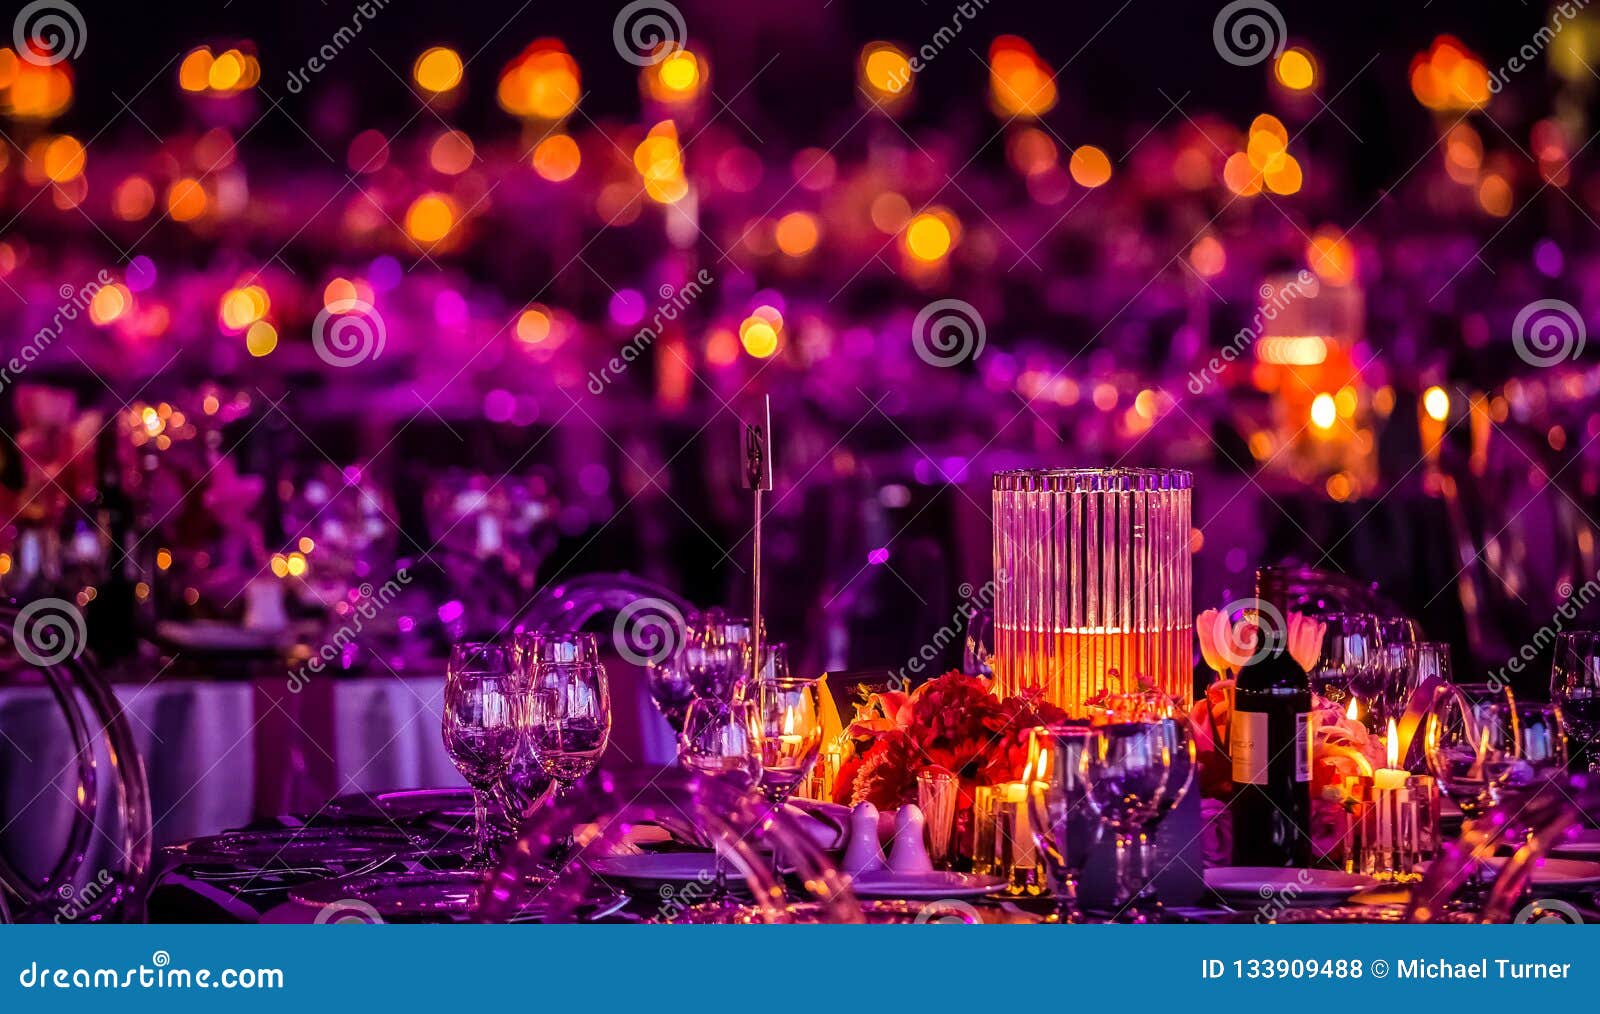 pink and purple christmas decor with candles and lamps for a large party or gala dinner